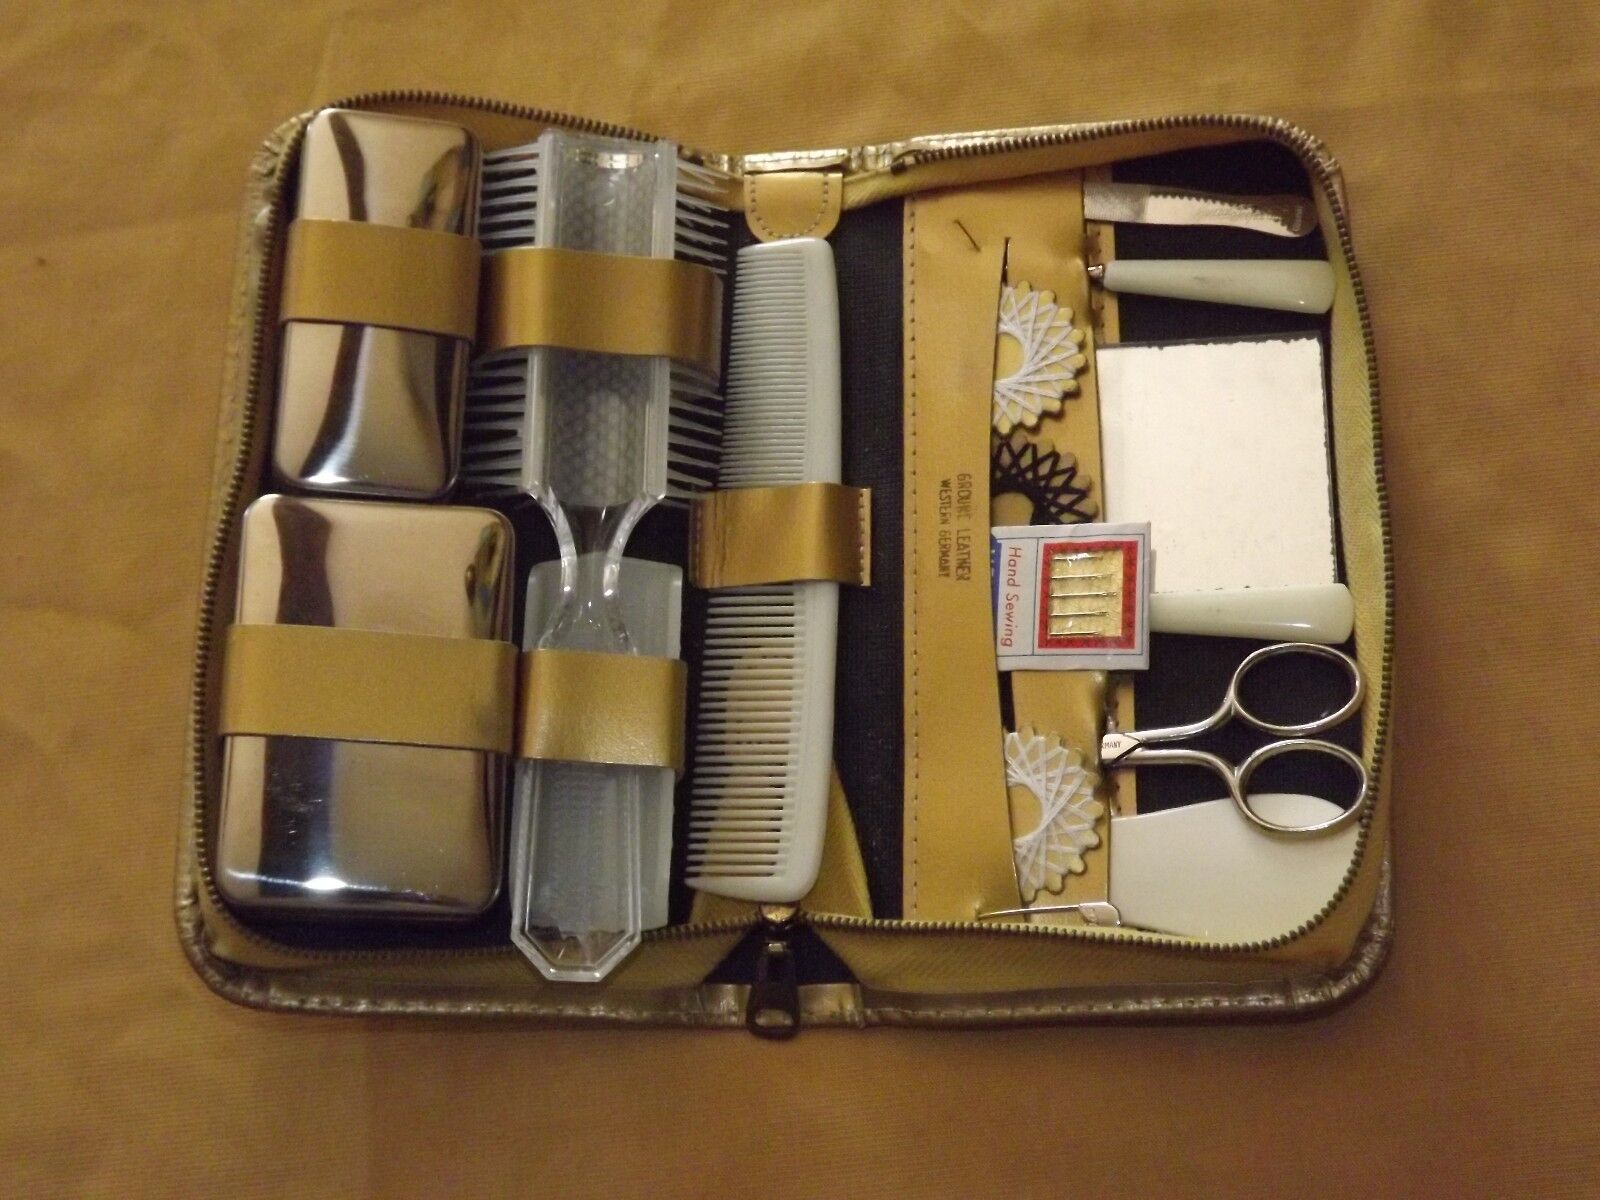 VINTAGE GROUND LEATHER WESTERN GERMANY MANICURE SEWING COMB + TRAVEL KIT UNUSED